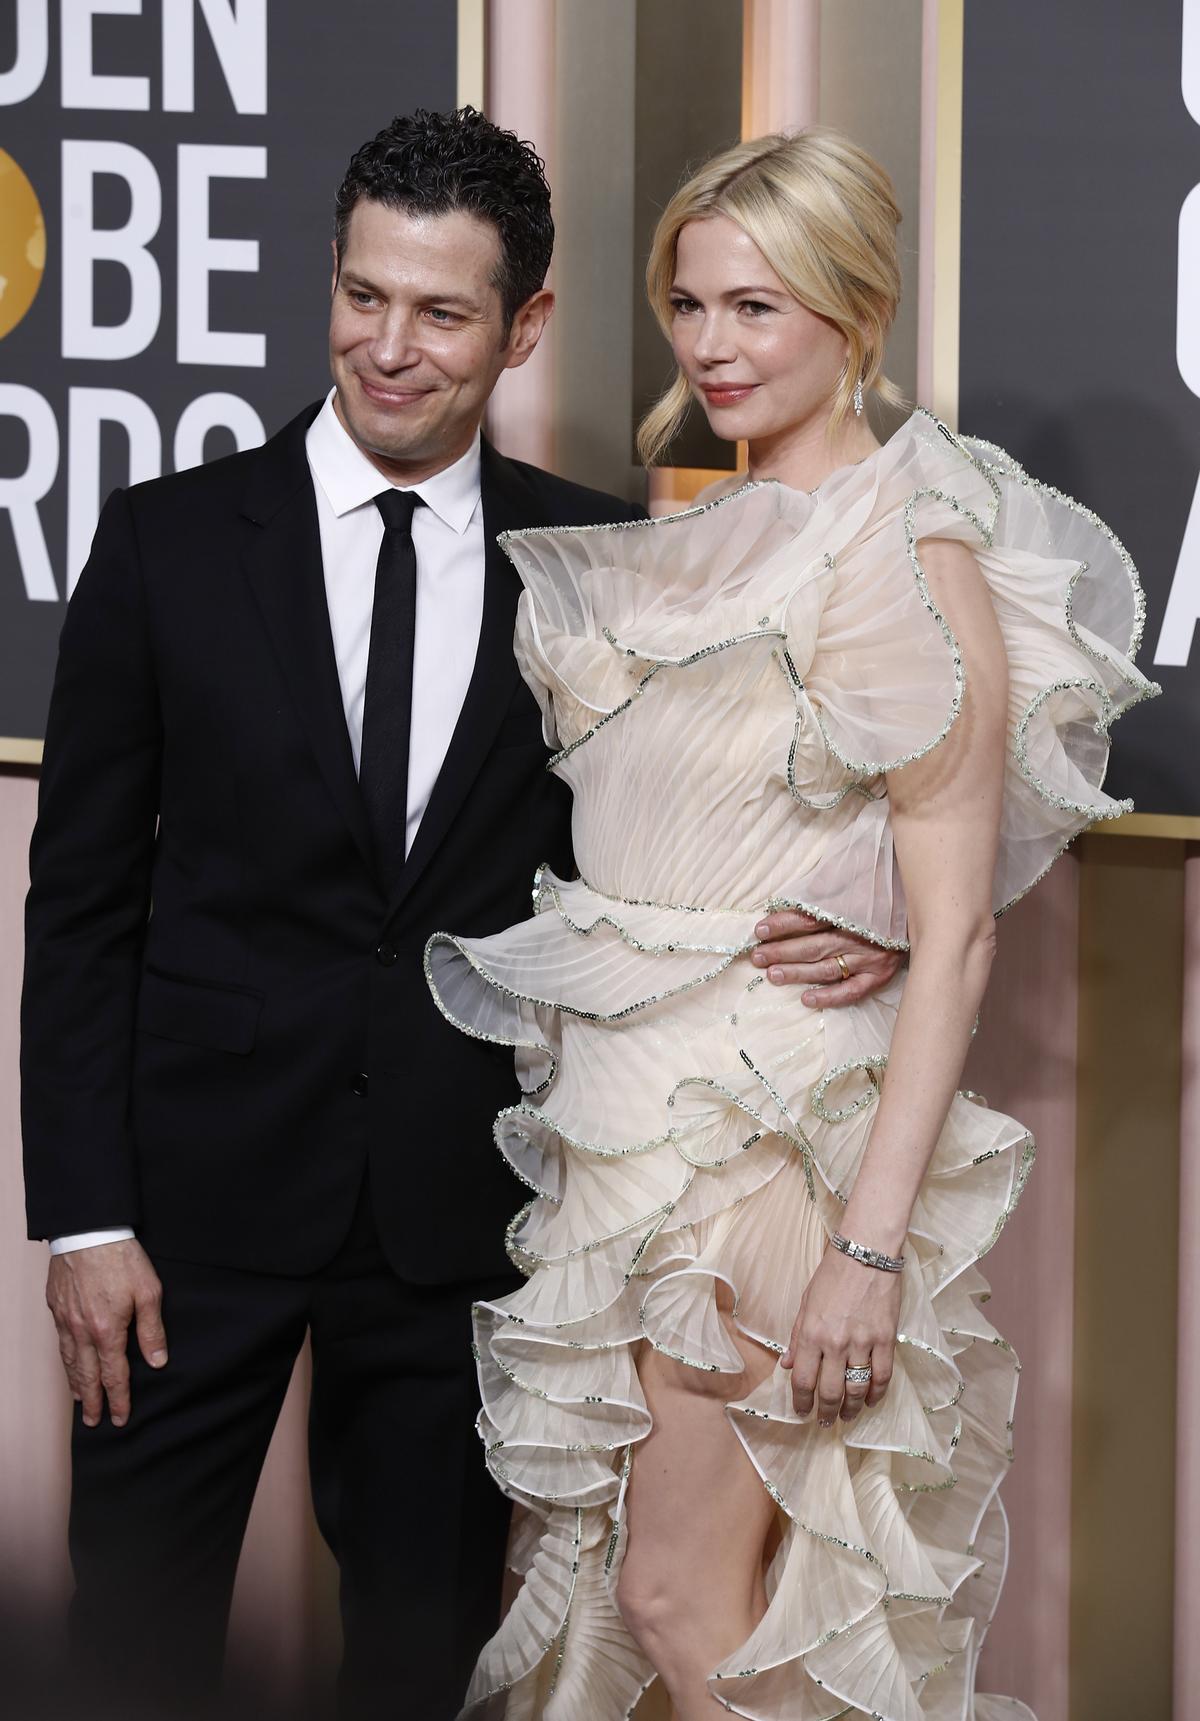 Beverly Hills (United States), 10/01/2023.- Michelle Williams (R) and Thomas Kail (L) arrive for the 80th annual Golden Globe Awards ceremony at the Beverly Hilton Hotel, in Beverly Hills, California, USA, 10 January 2023. Artists in various film and television categories are awarded Golden Globes by the Hollywood Foreign Press Association. (Estados Unidos) EFE/EPA/CAROLINE BREHMAN